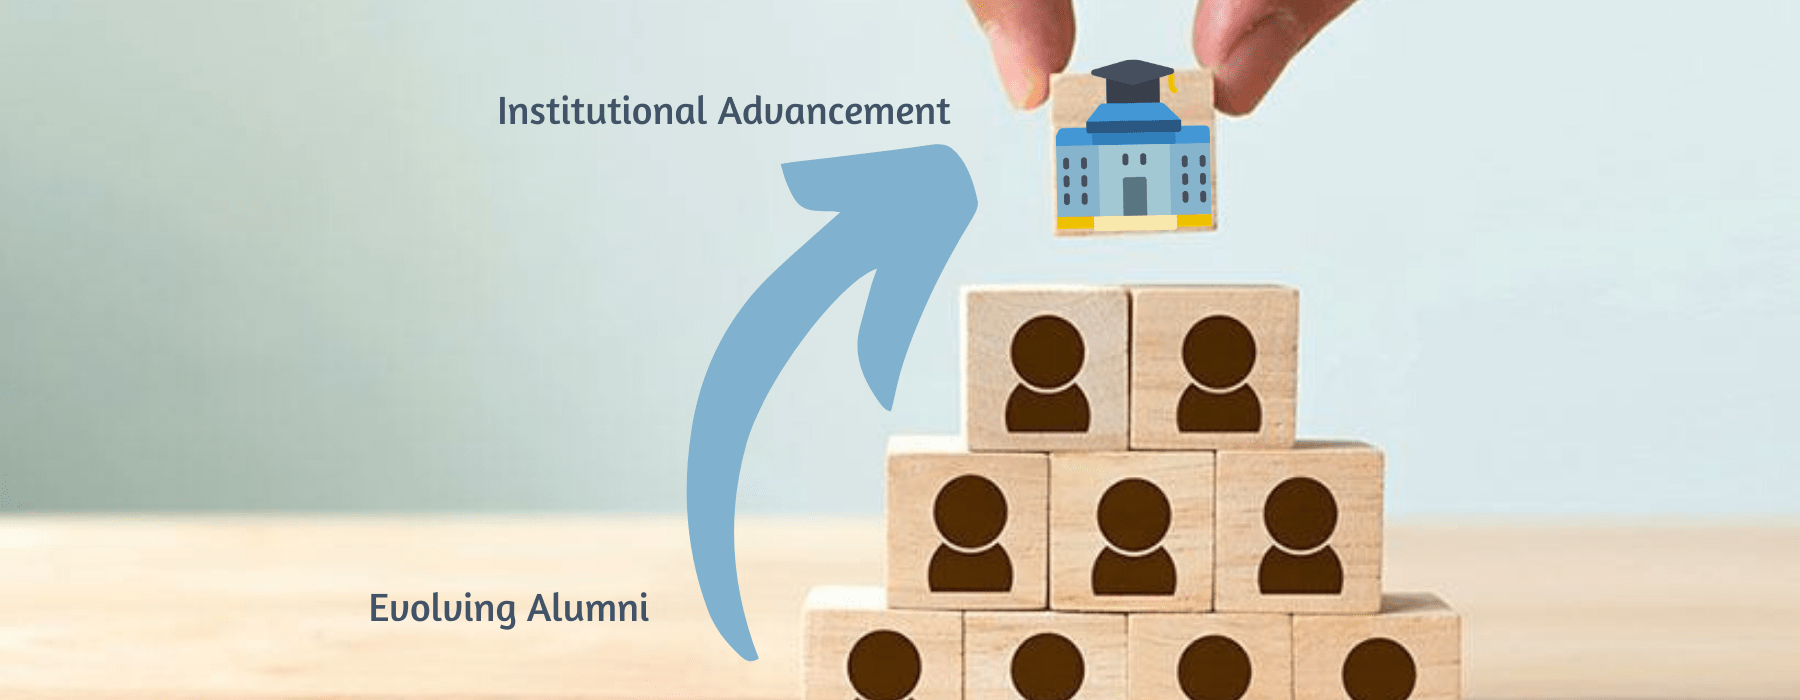 Evolving Alumni for Institutional Advancement; an Upward Sloping Graph